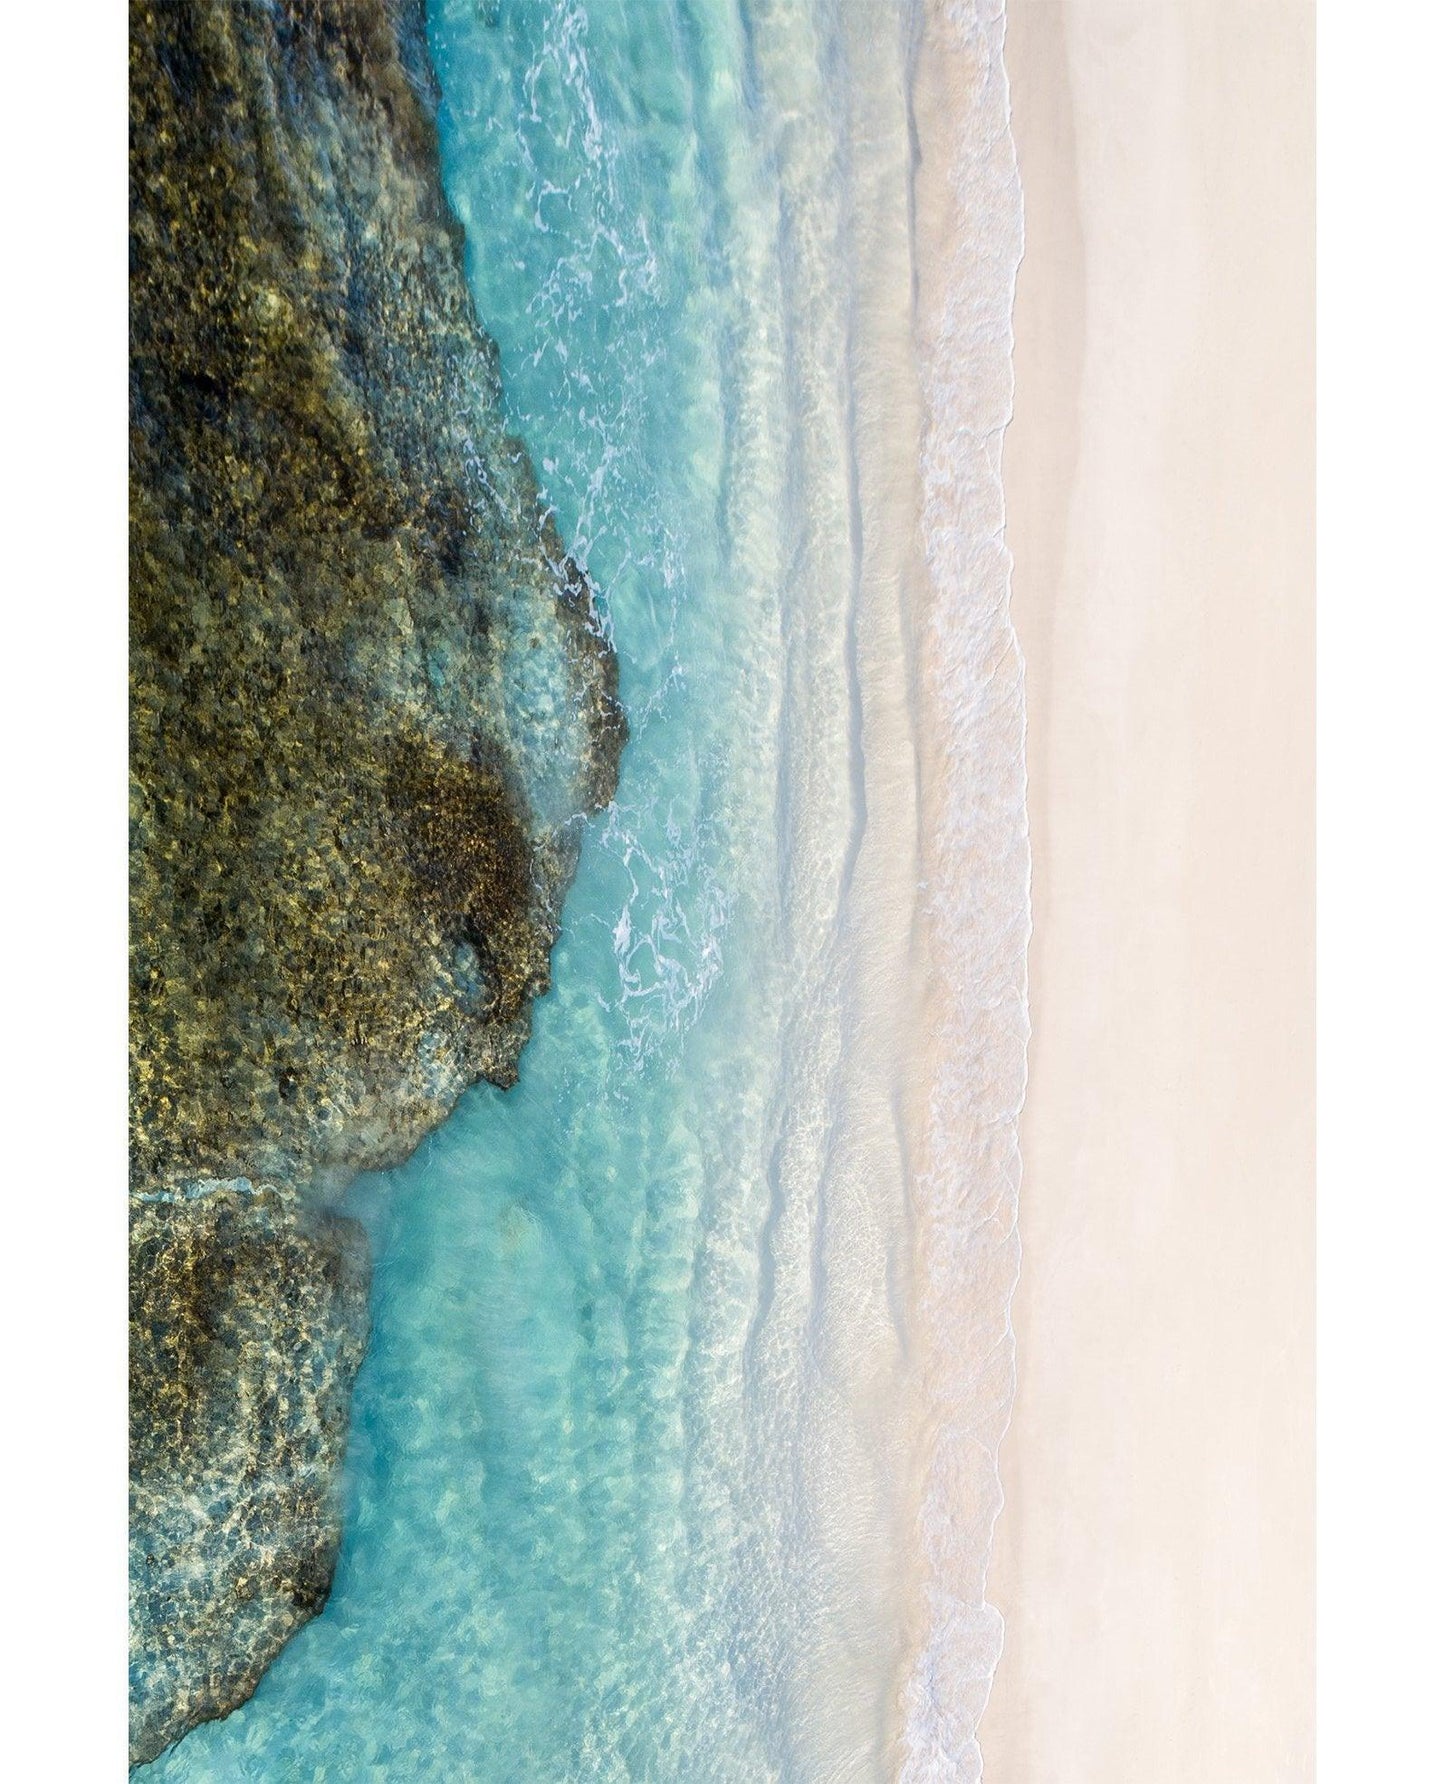 CC102 - Coral Bay Shallows - Sixty Summers